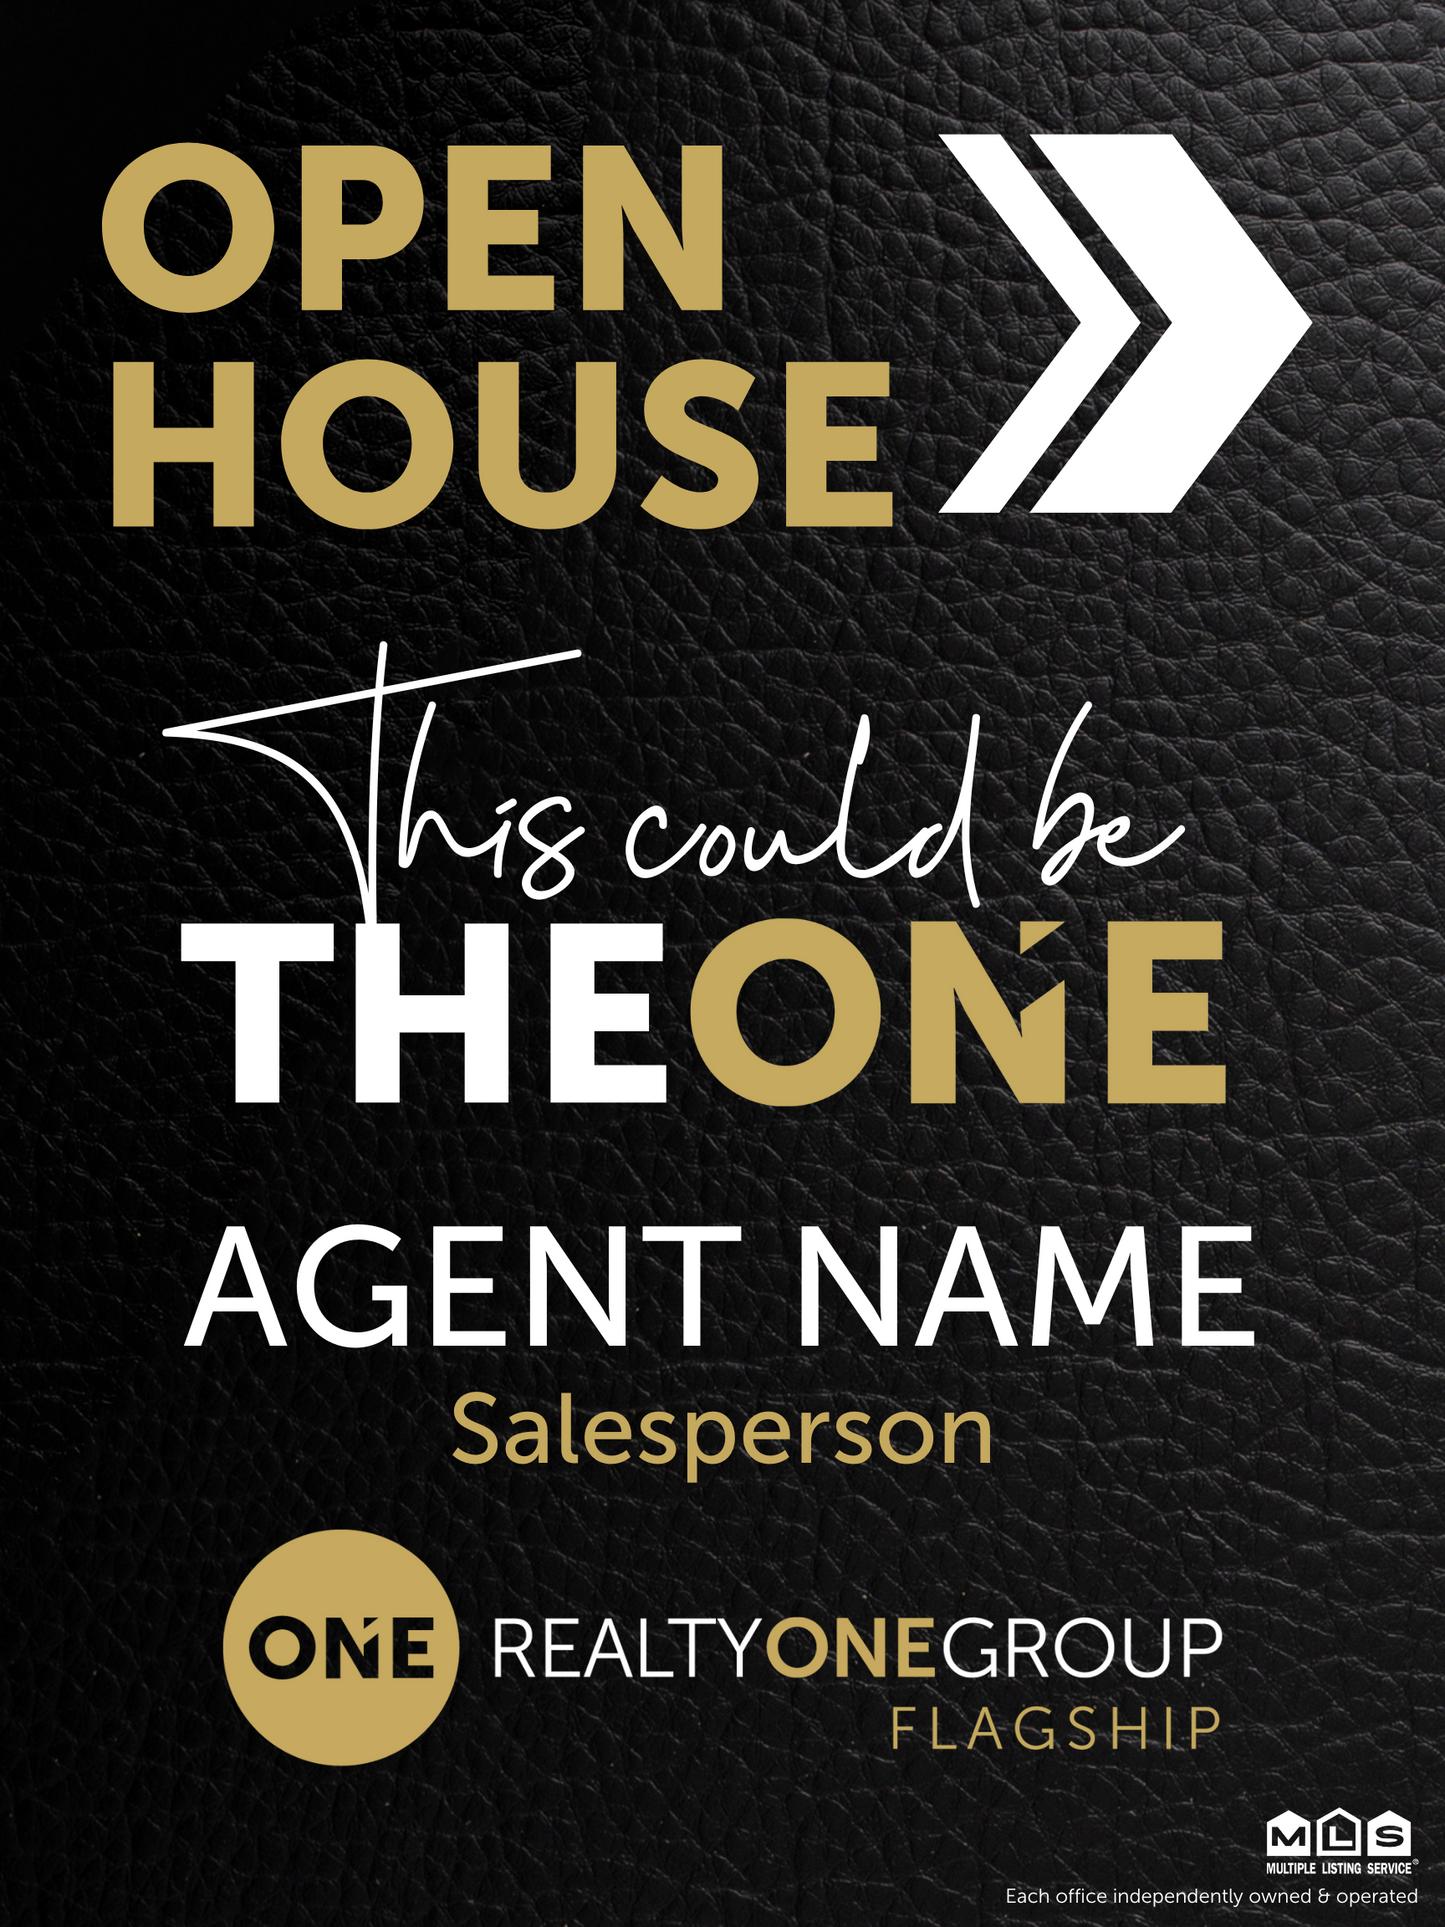 This Could Be The ONE Leather Open House Sign